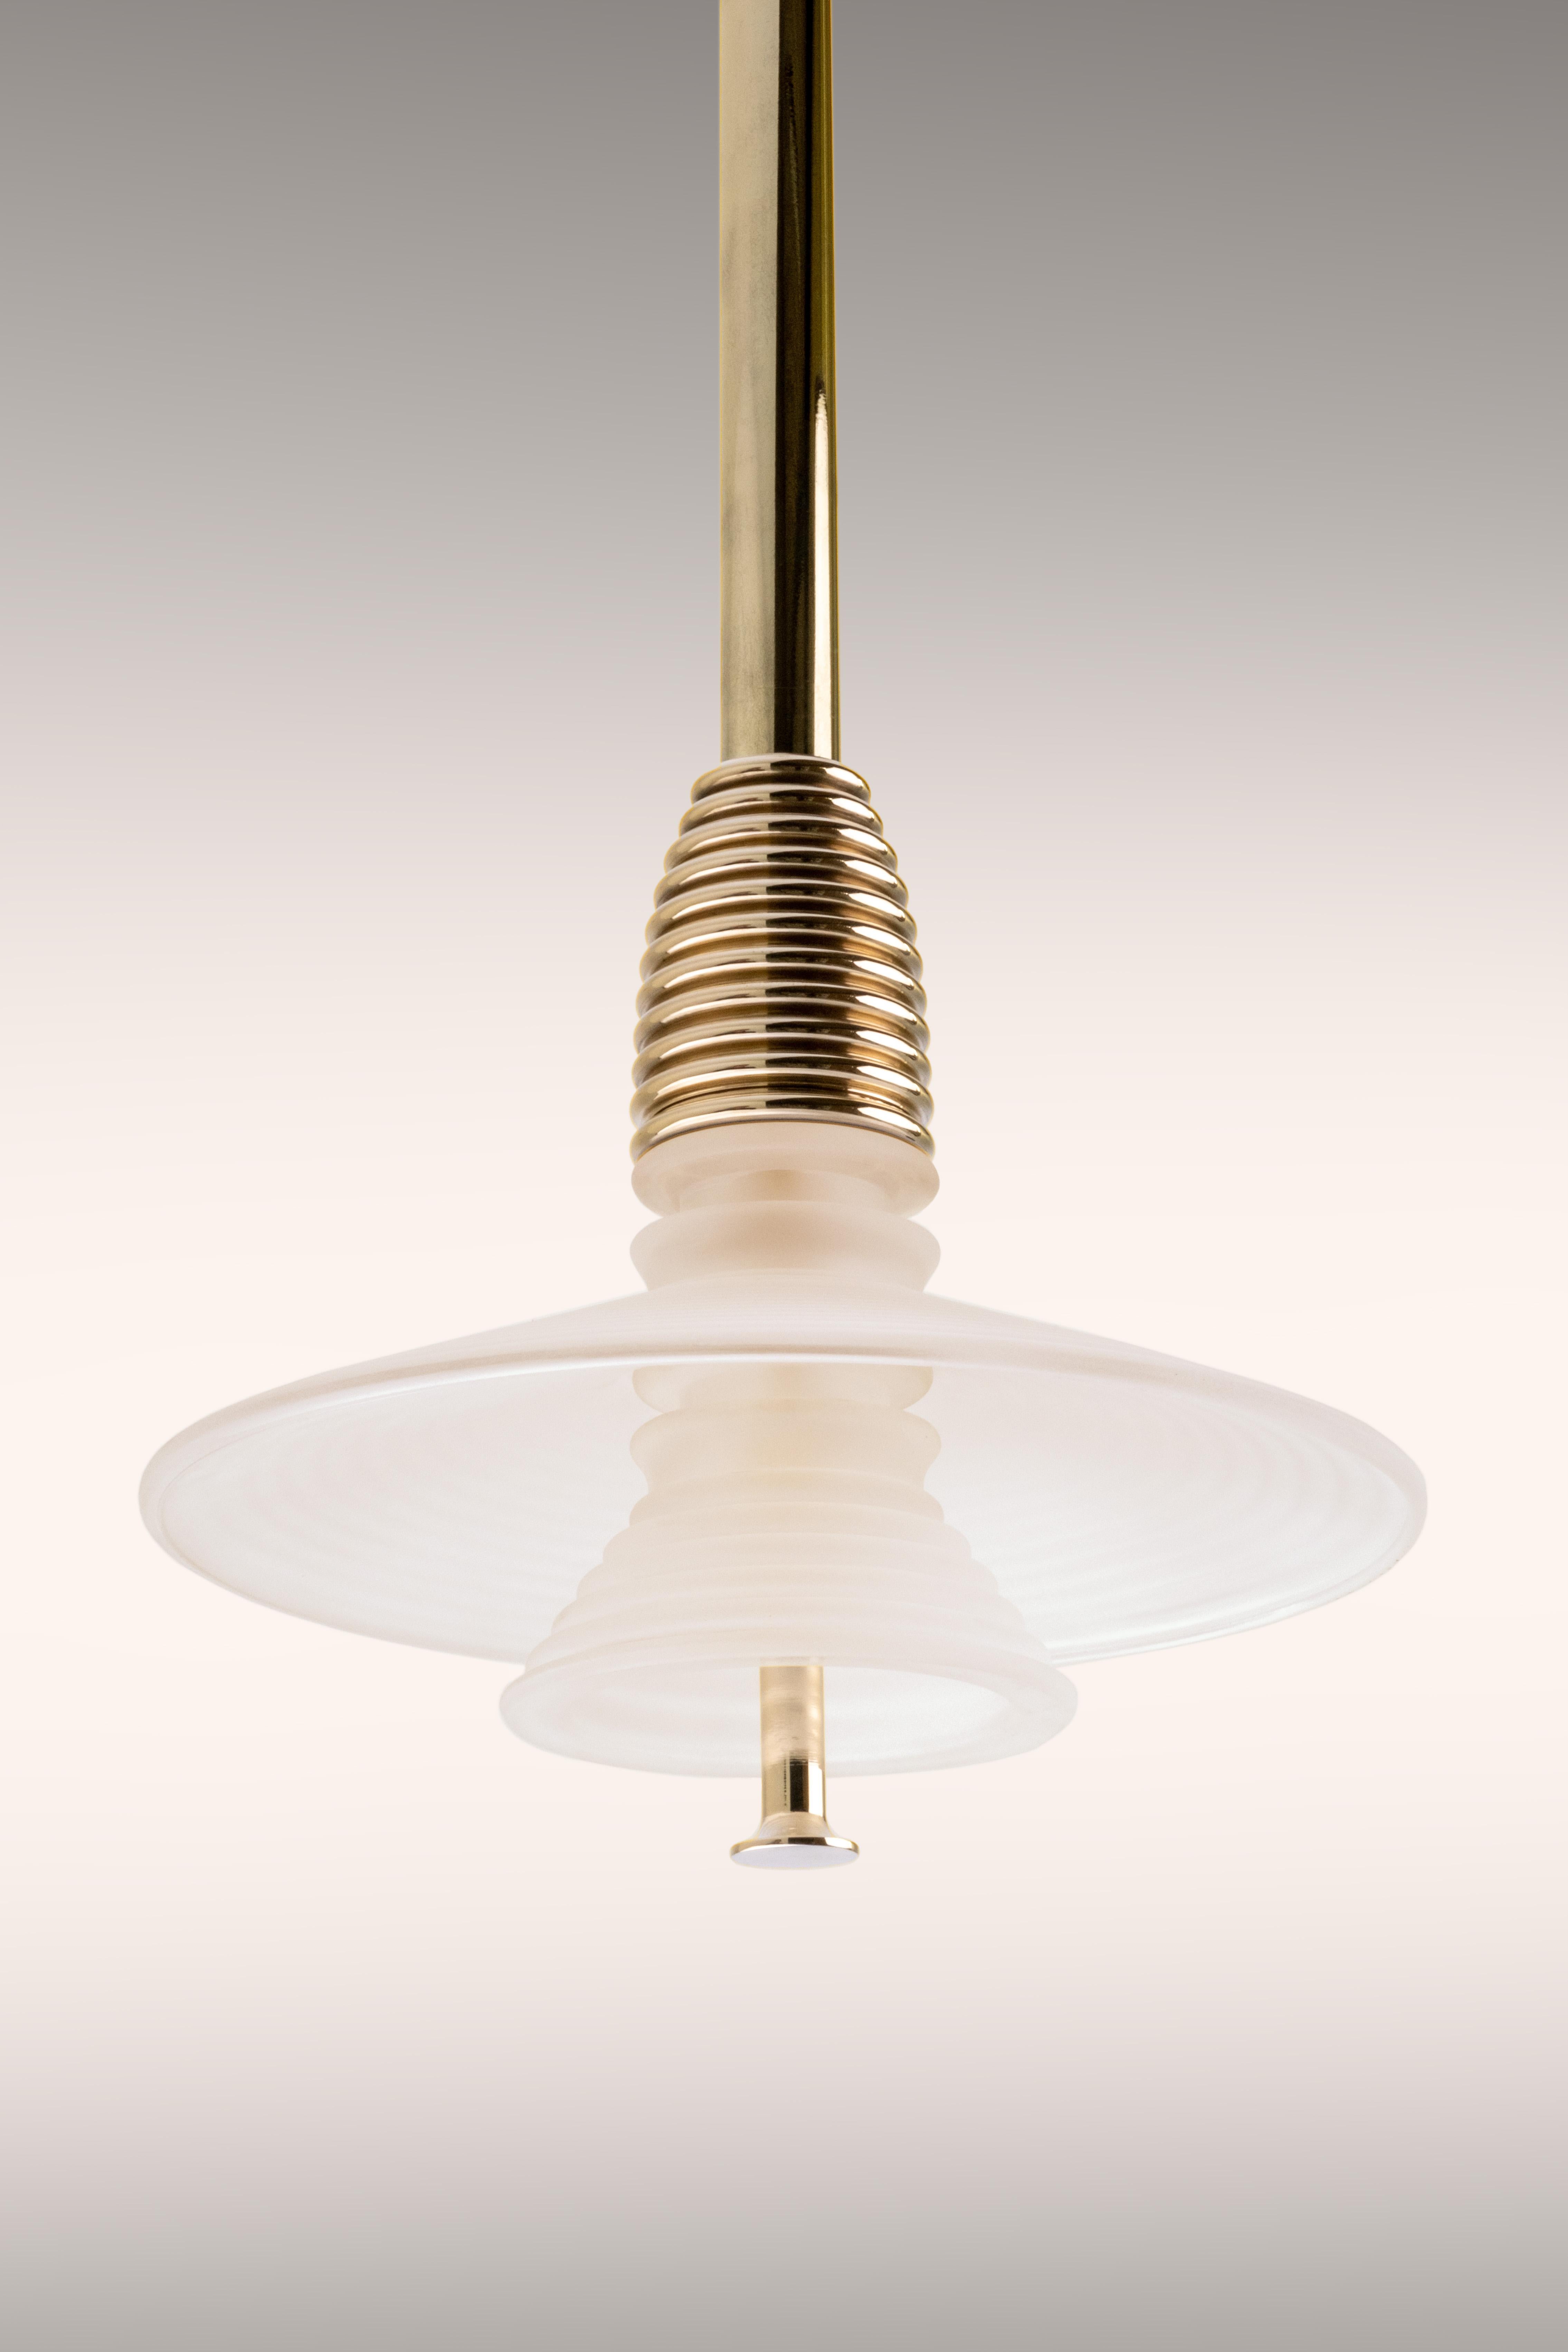 The Insulator 'AB' Pendant in dark brass and clear glass by NOVOCASTRIAN deco In New Condition For Sale In Washington, GB